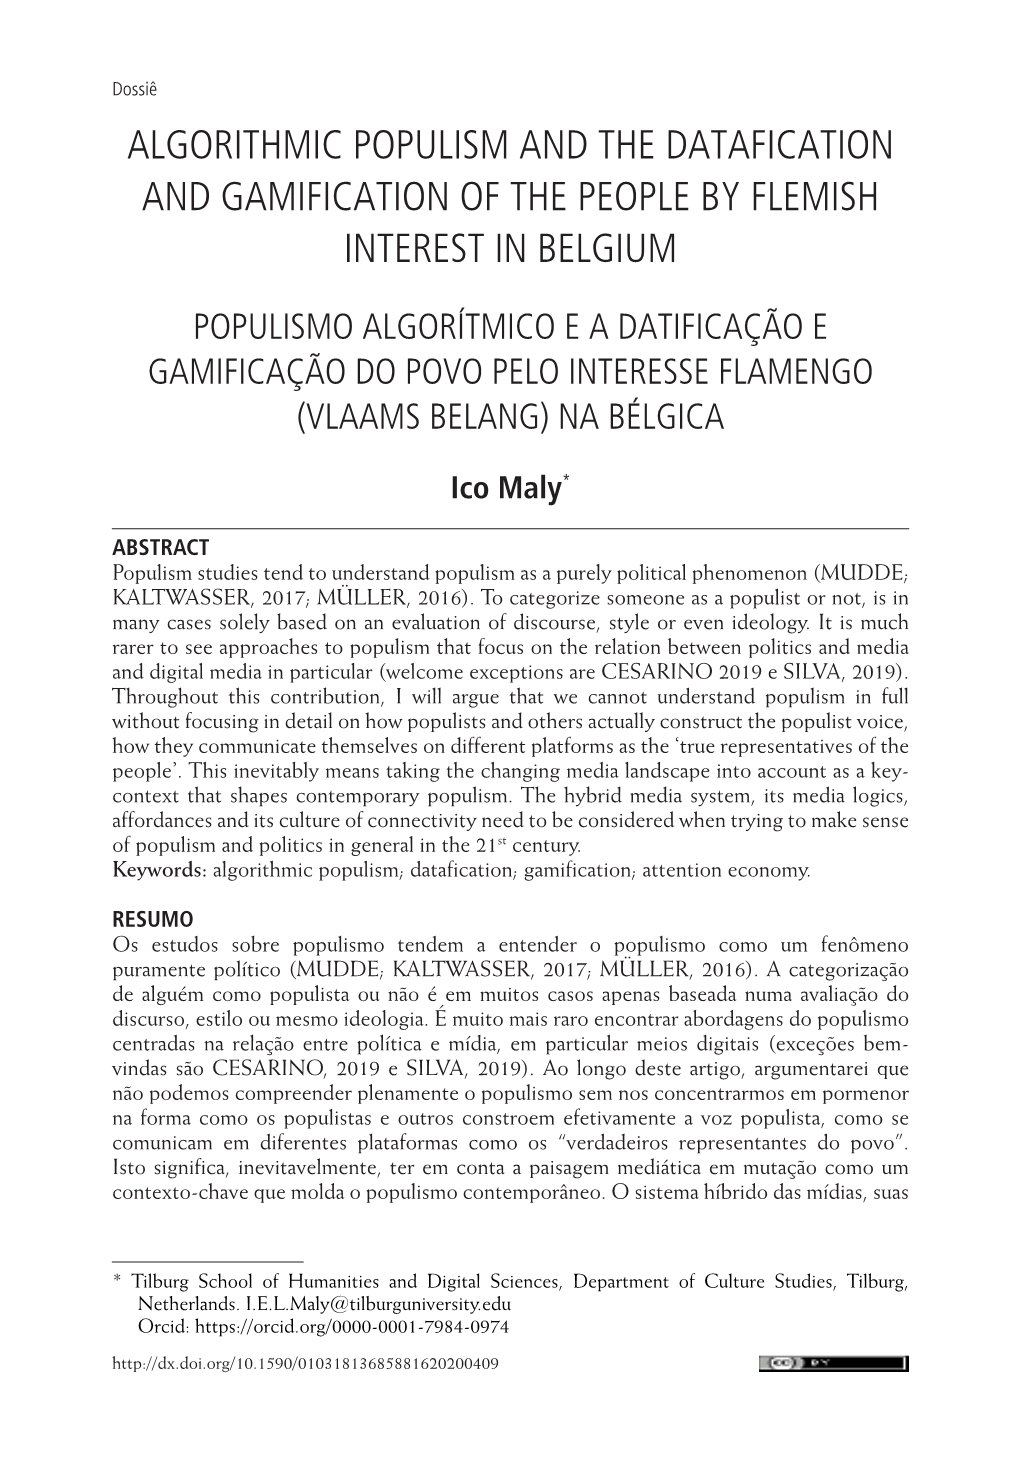 Algorithmic Populism and the Datafication and Gamification of the People by Flemish Interest in Belgium